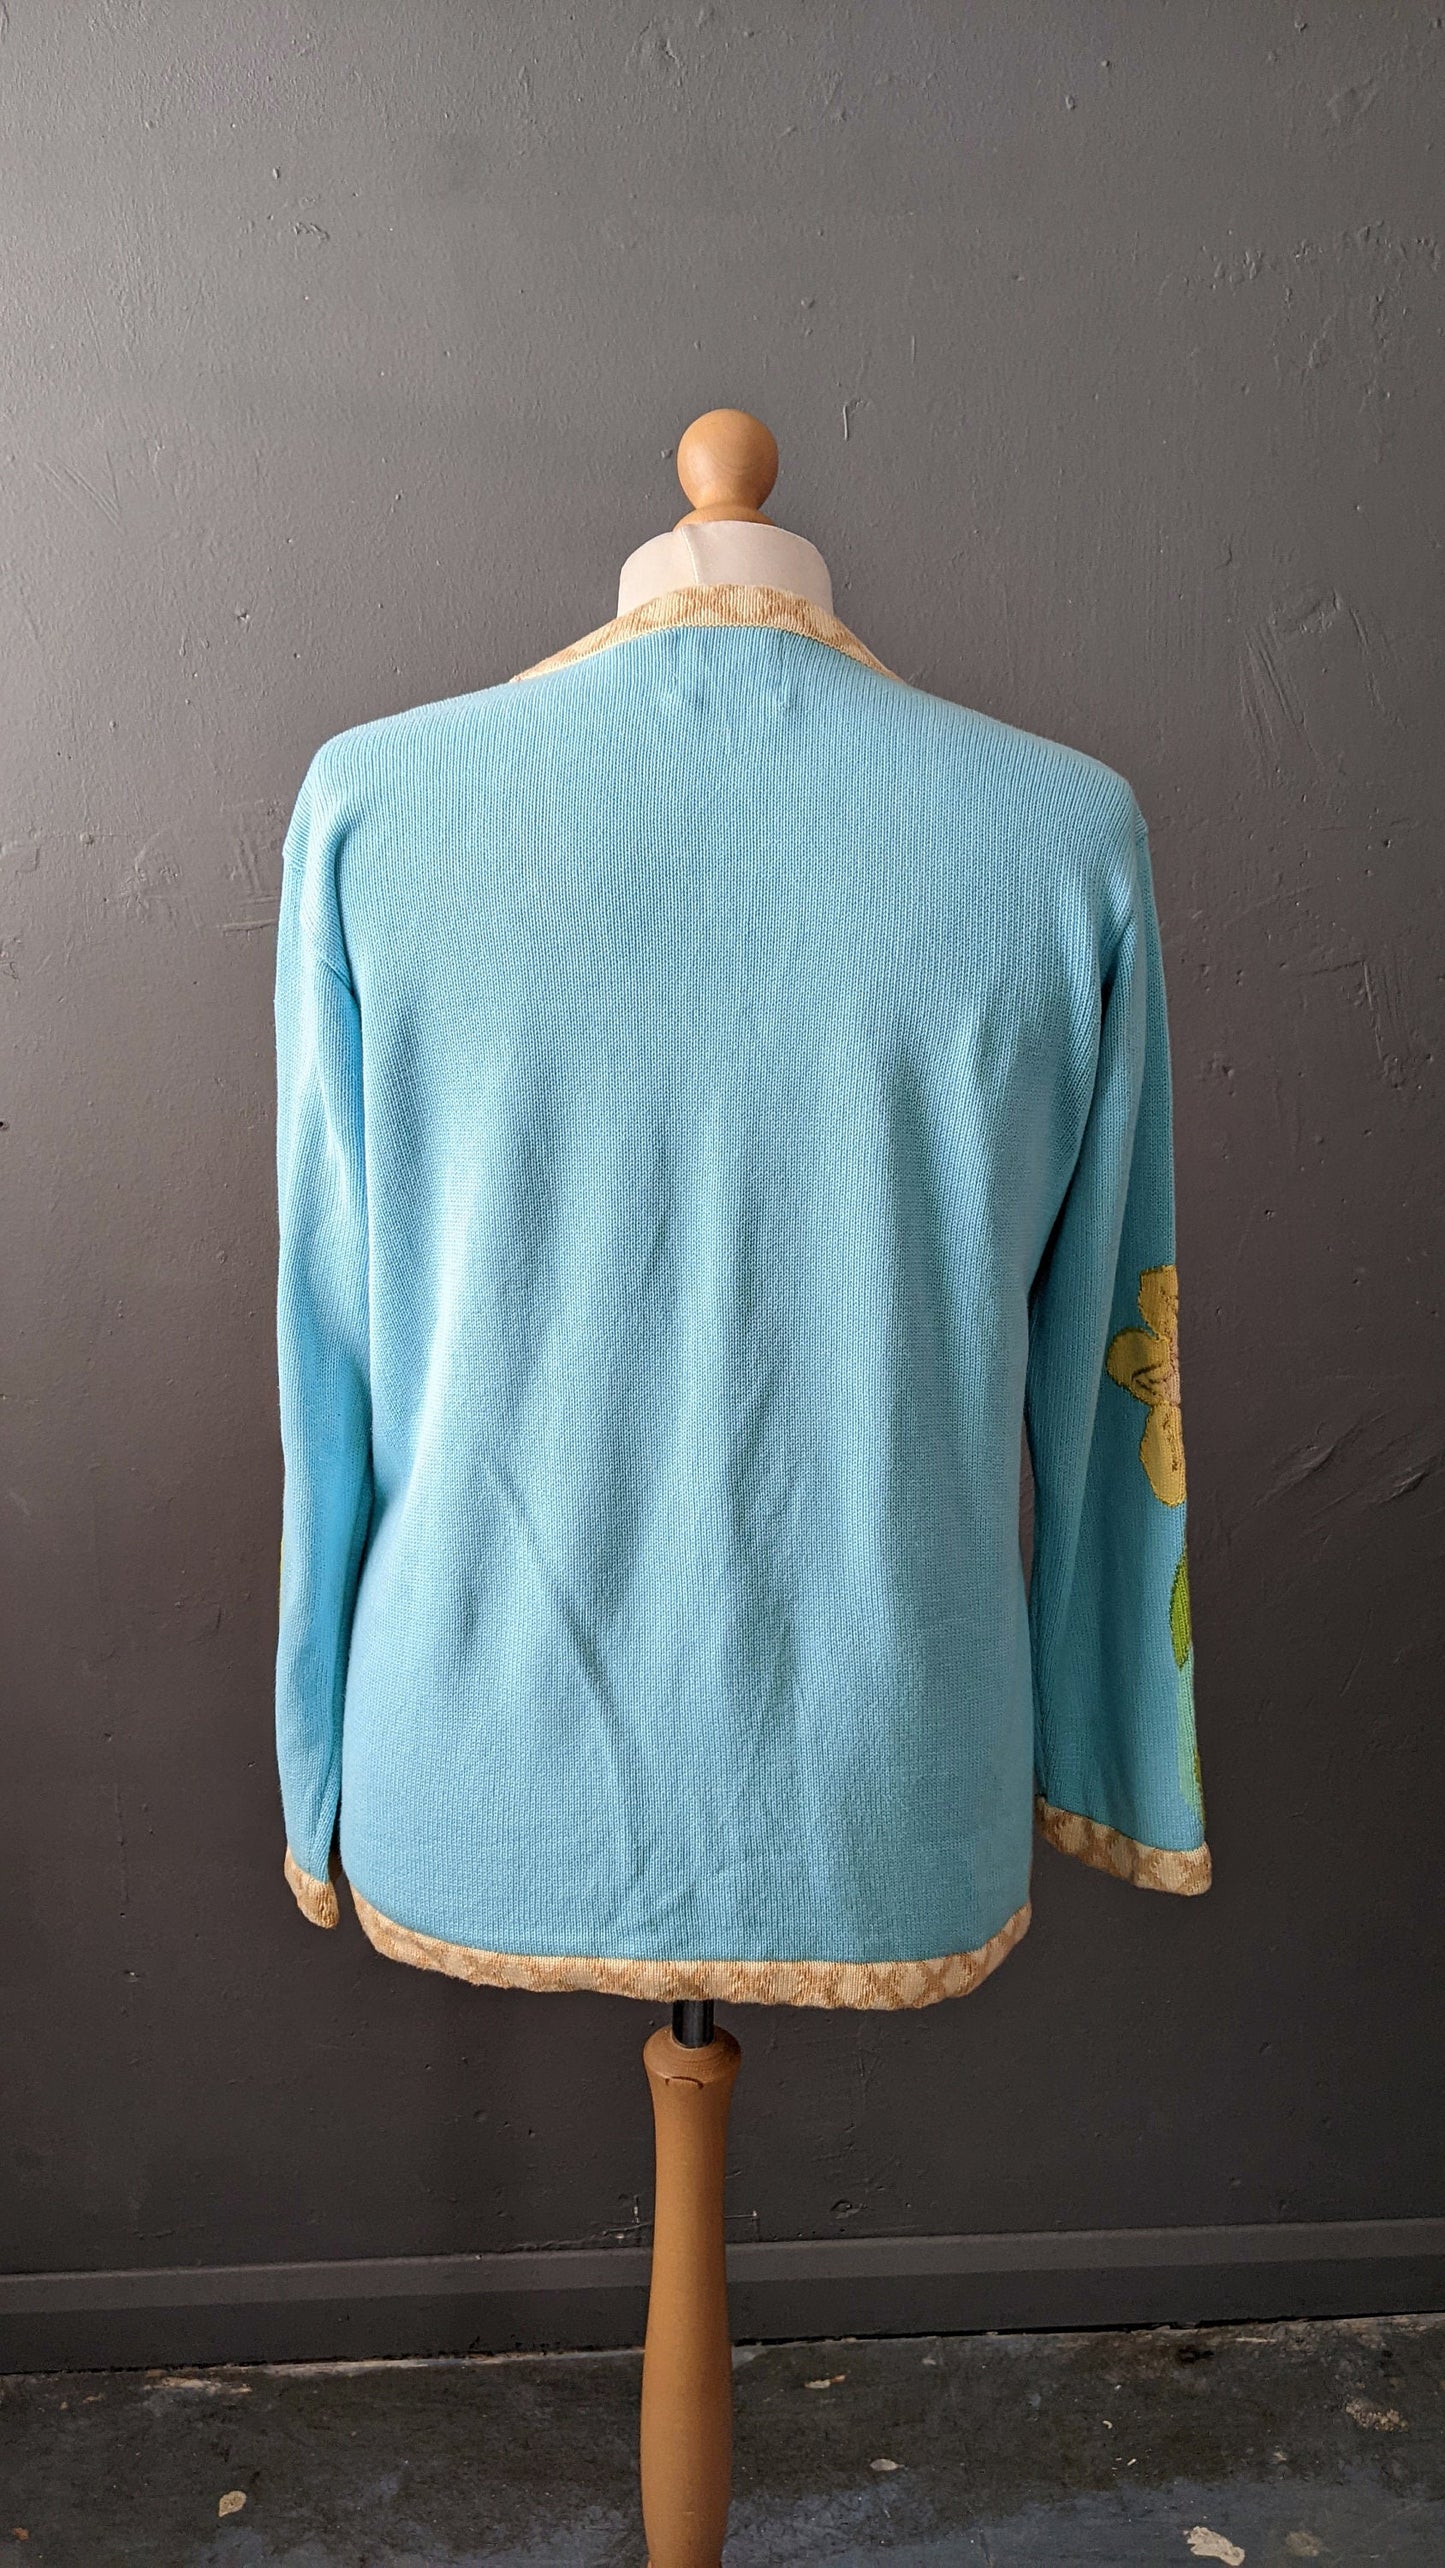 90s March Daffodils Cardigan by Storybook Knits, Colourful Spring Knitwear, Size Large XL